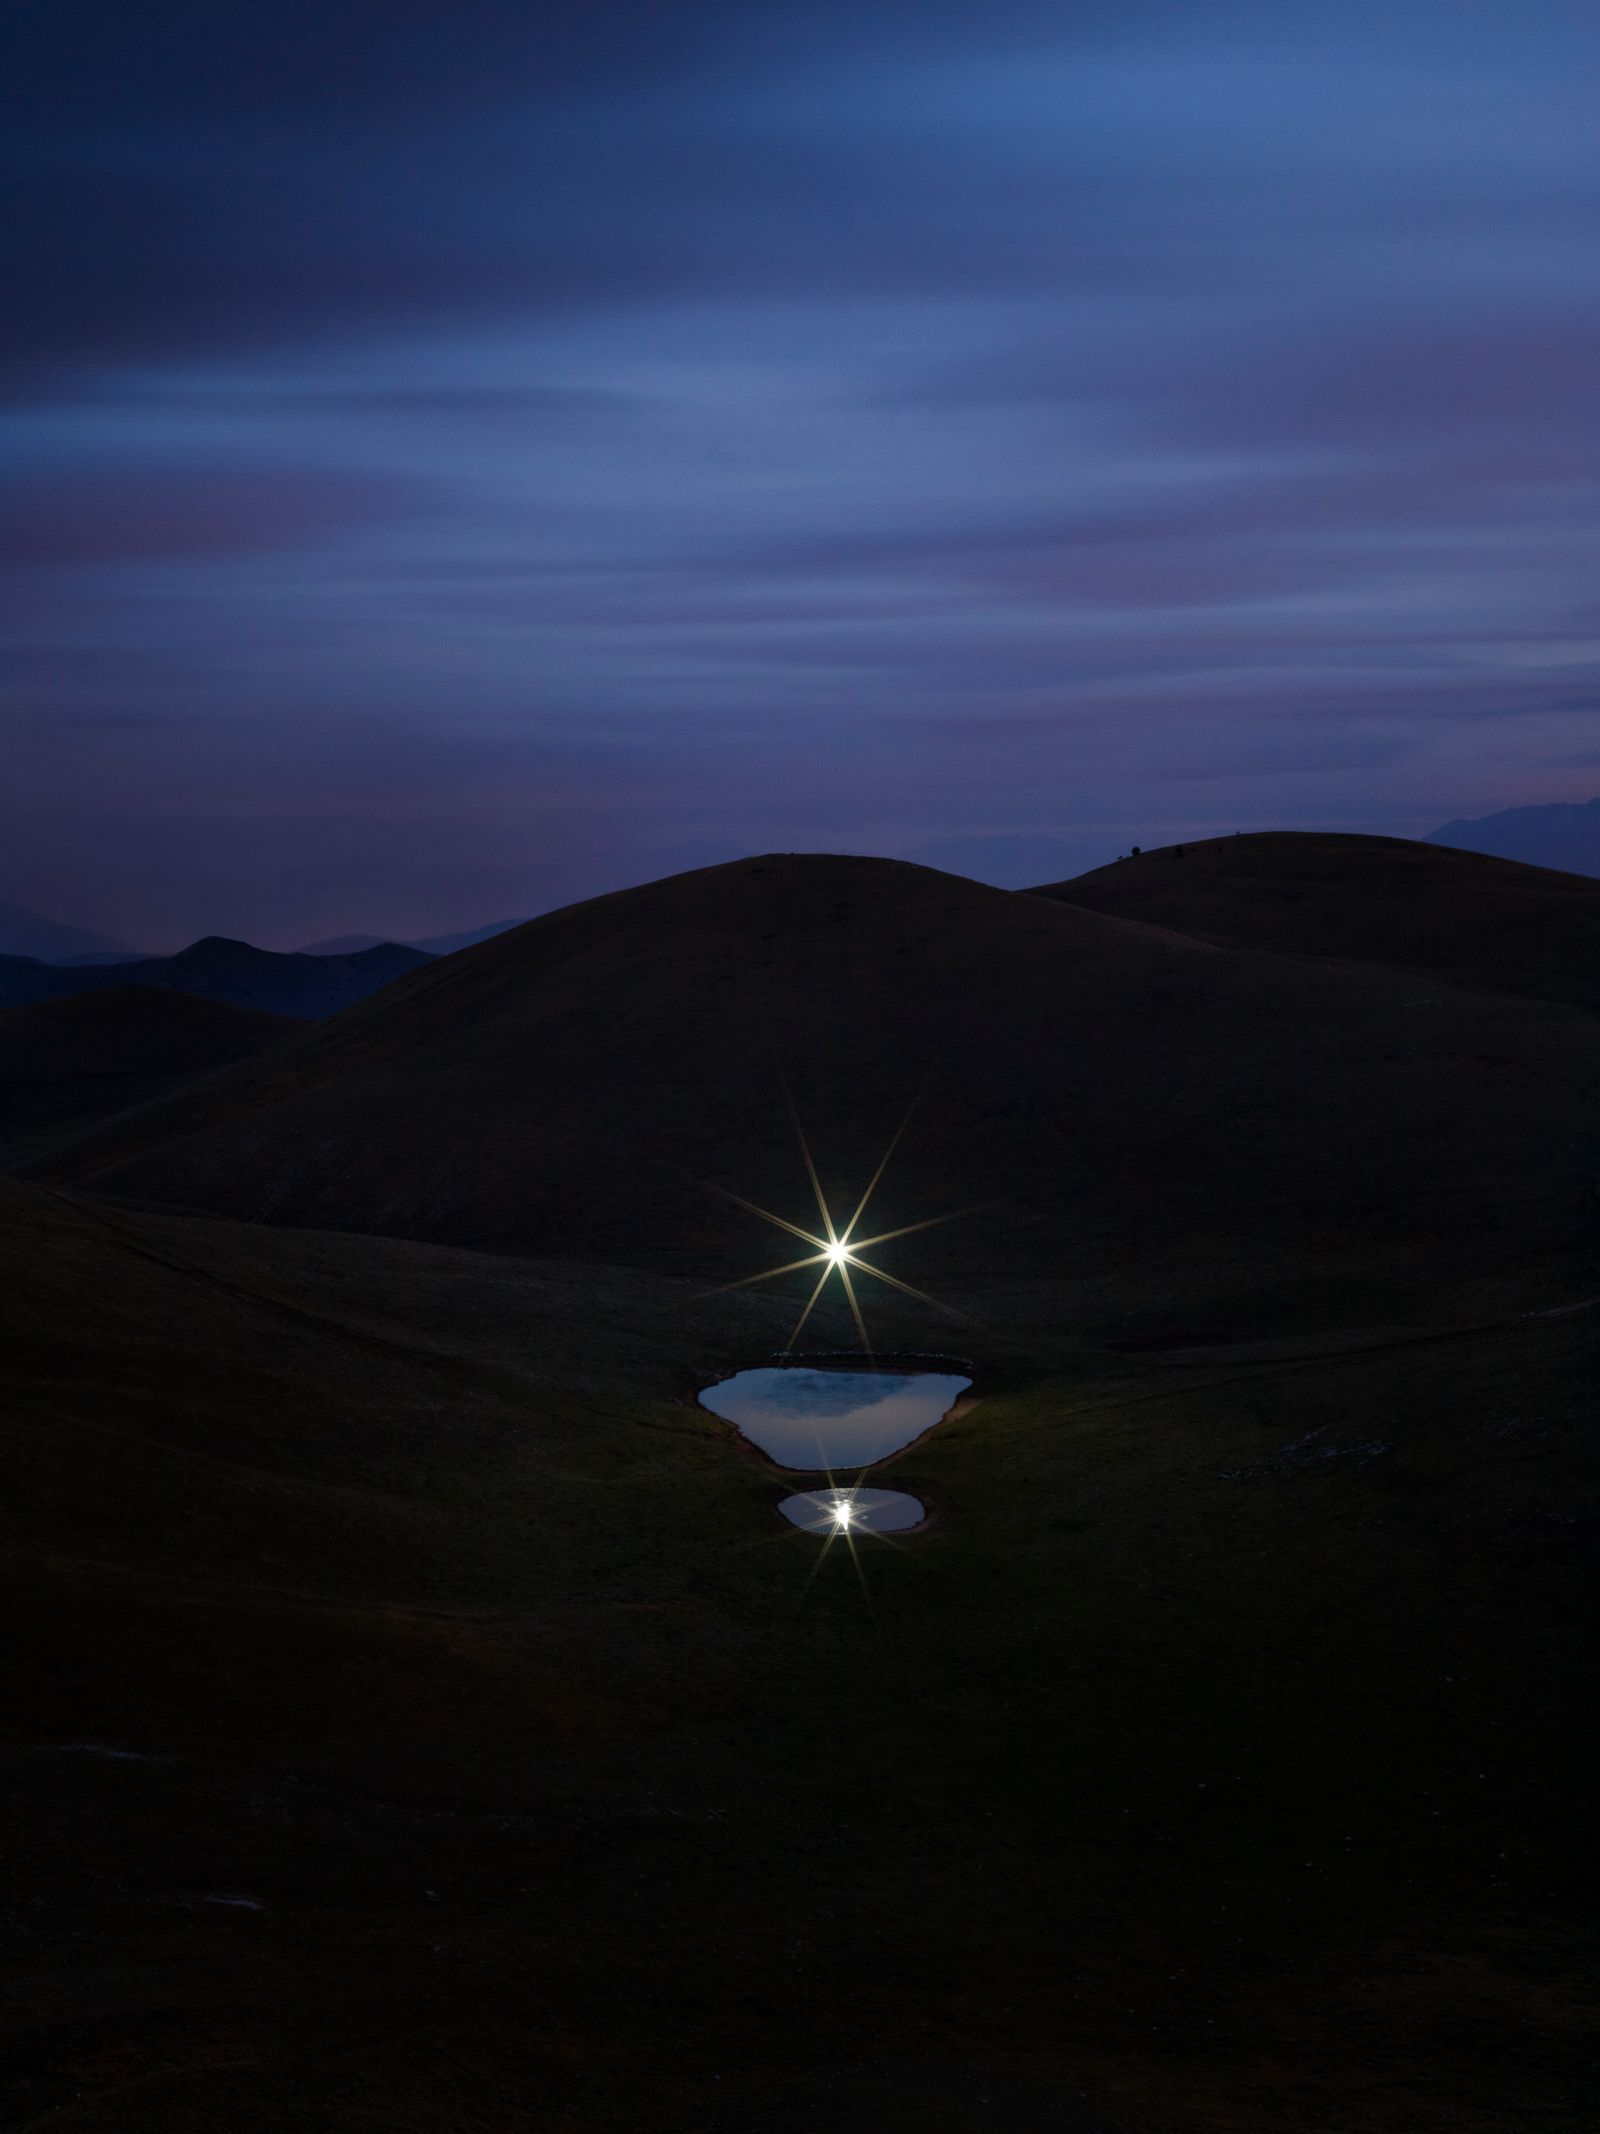 © Mirko Viglino - Image from the Map to the Star photography project